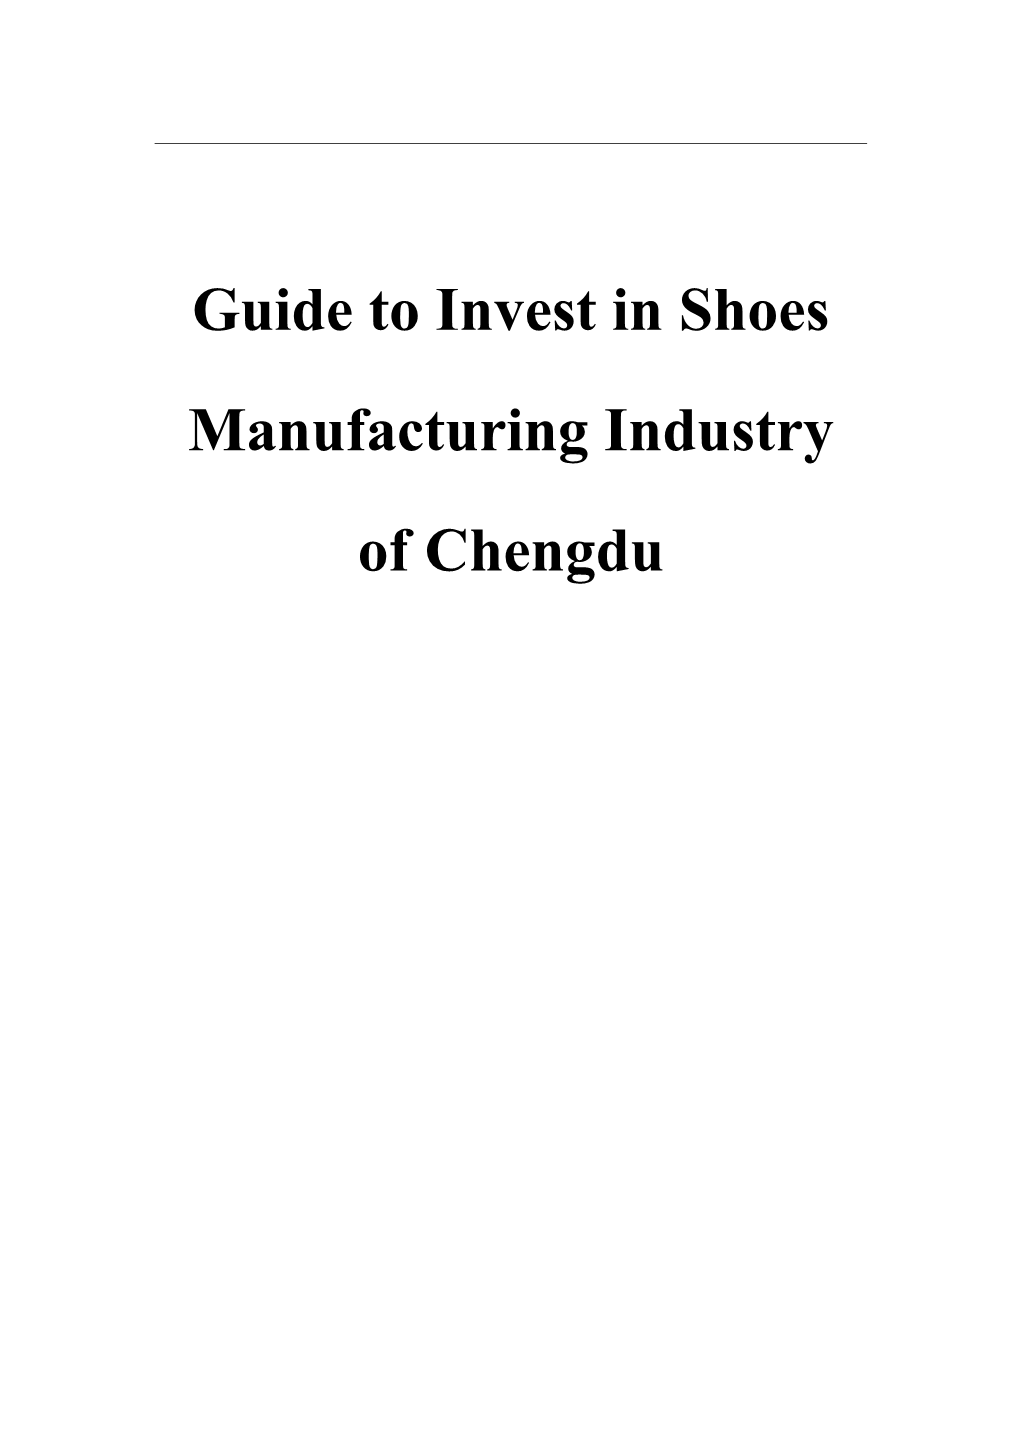 Guide to Invest in Shoes Manufacturing Industry of Chengdu